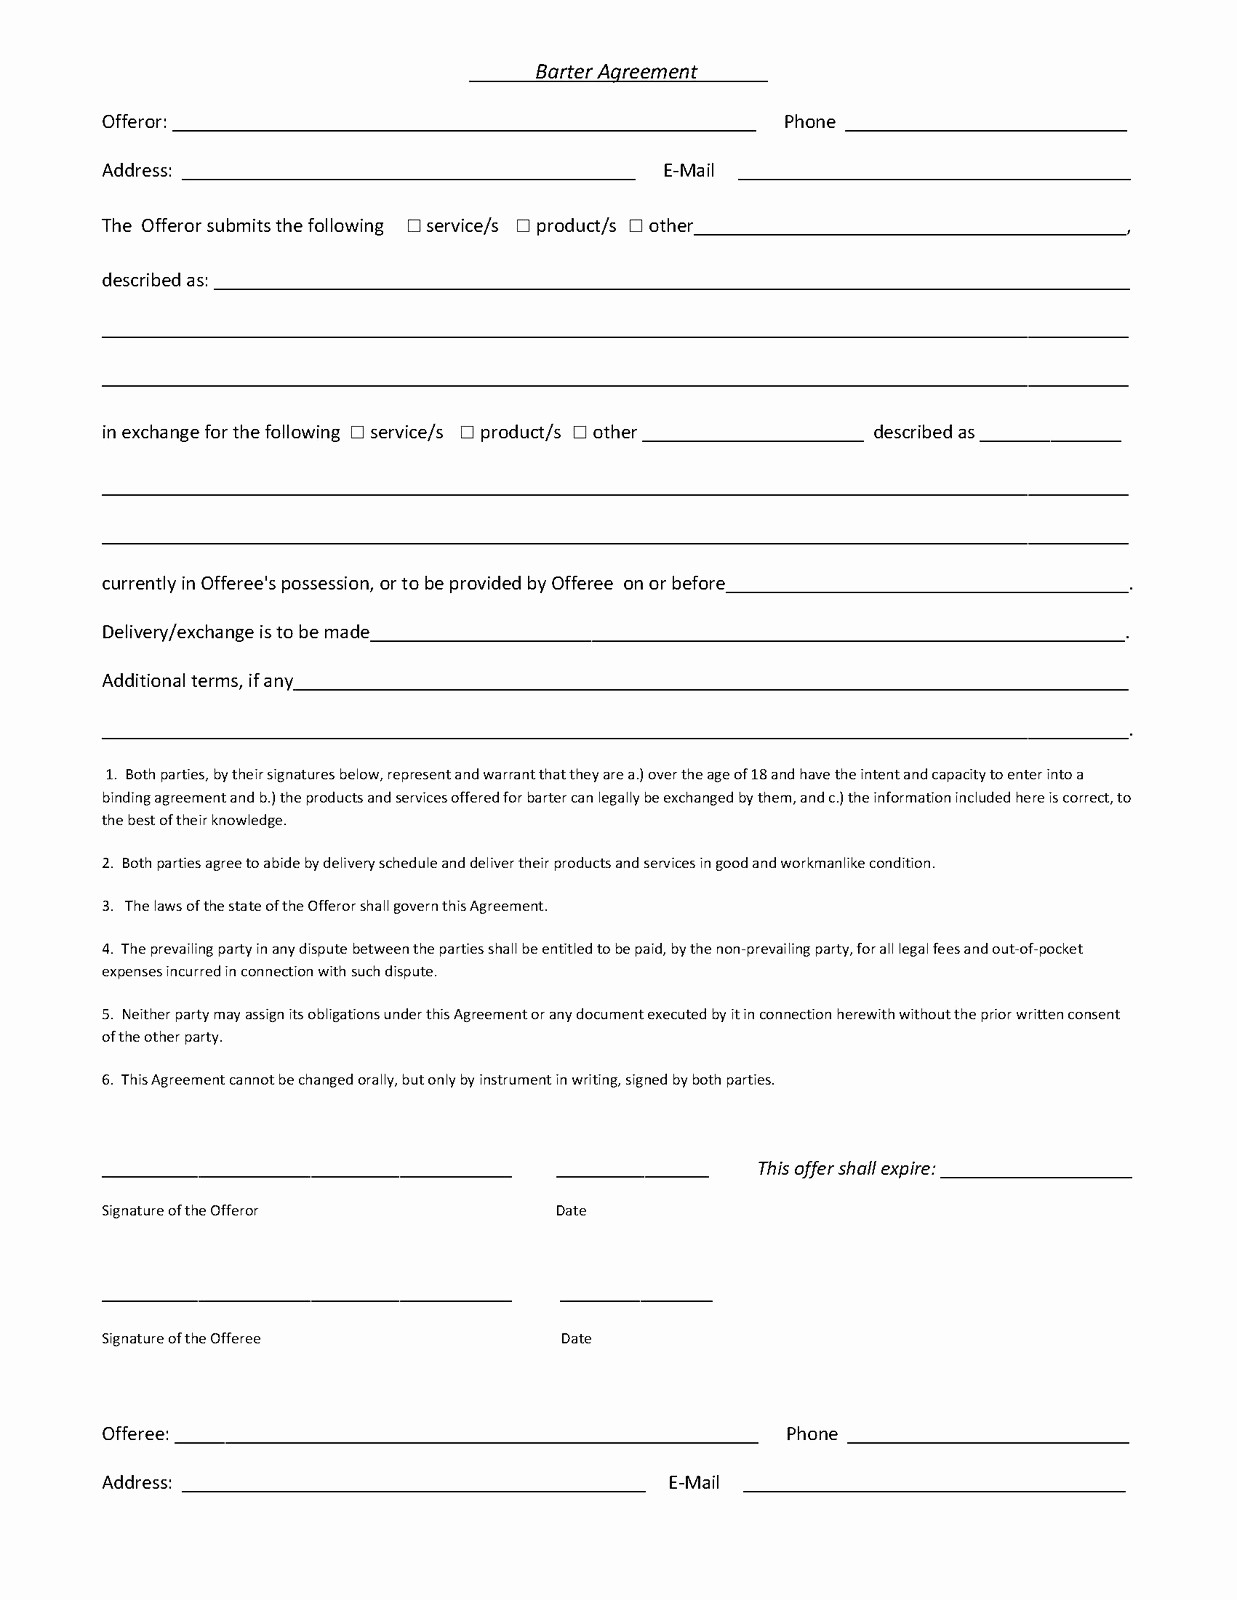 Free Barter Agreement Template Lovely Residential Lease Contract Document